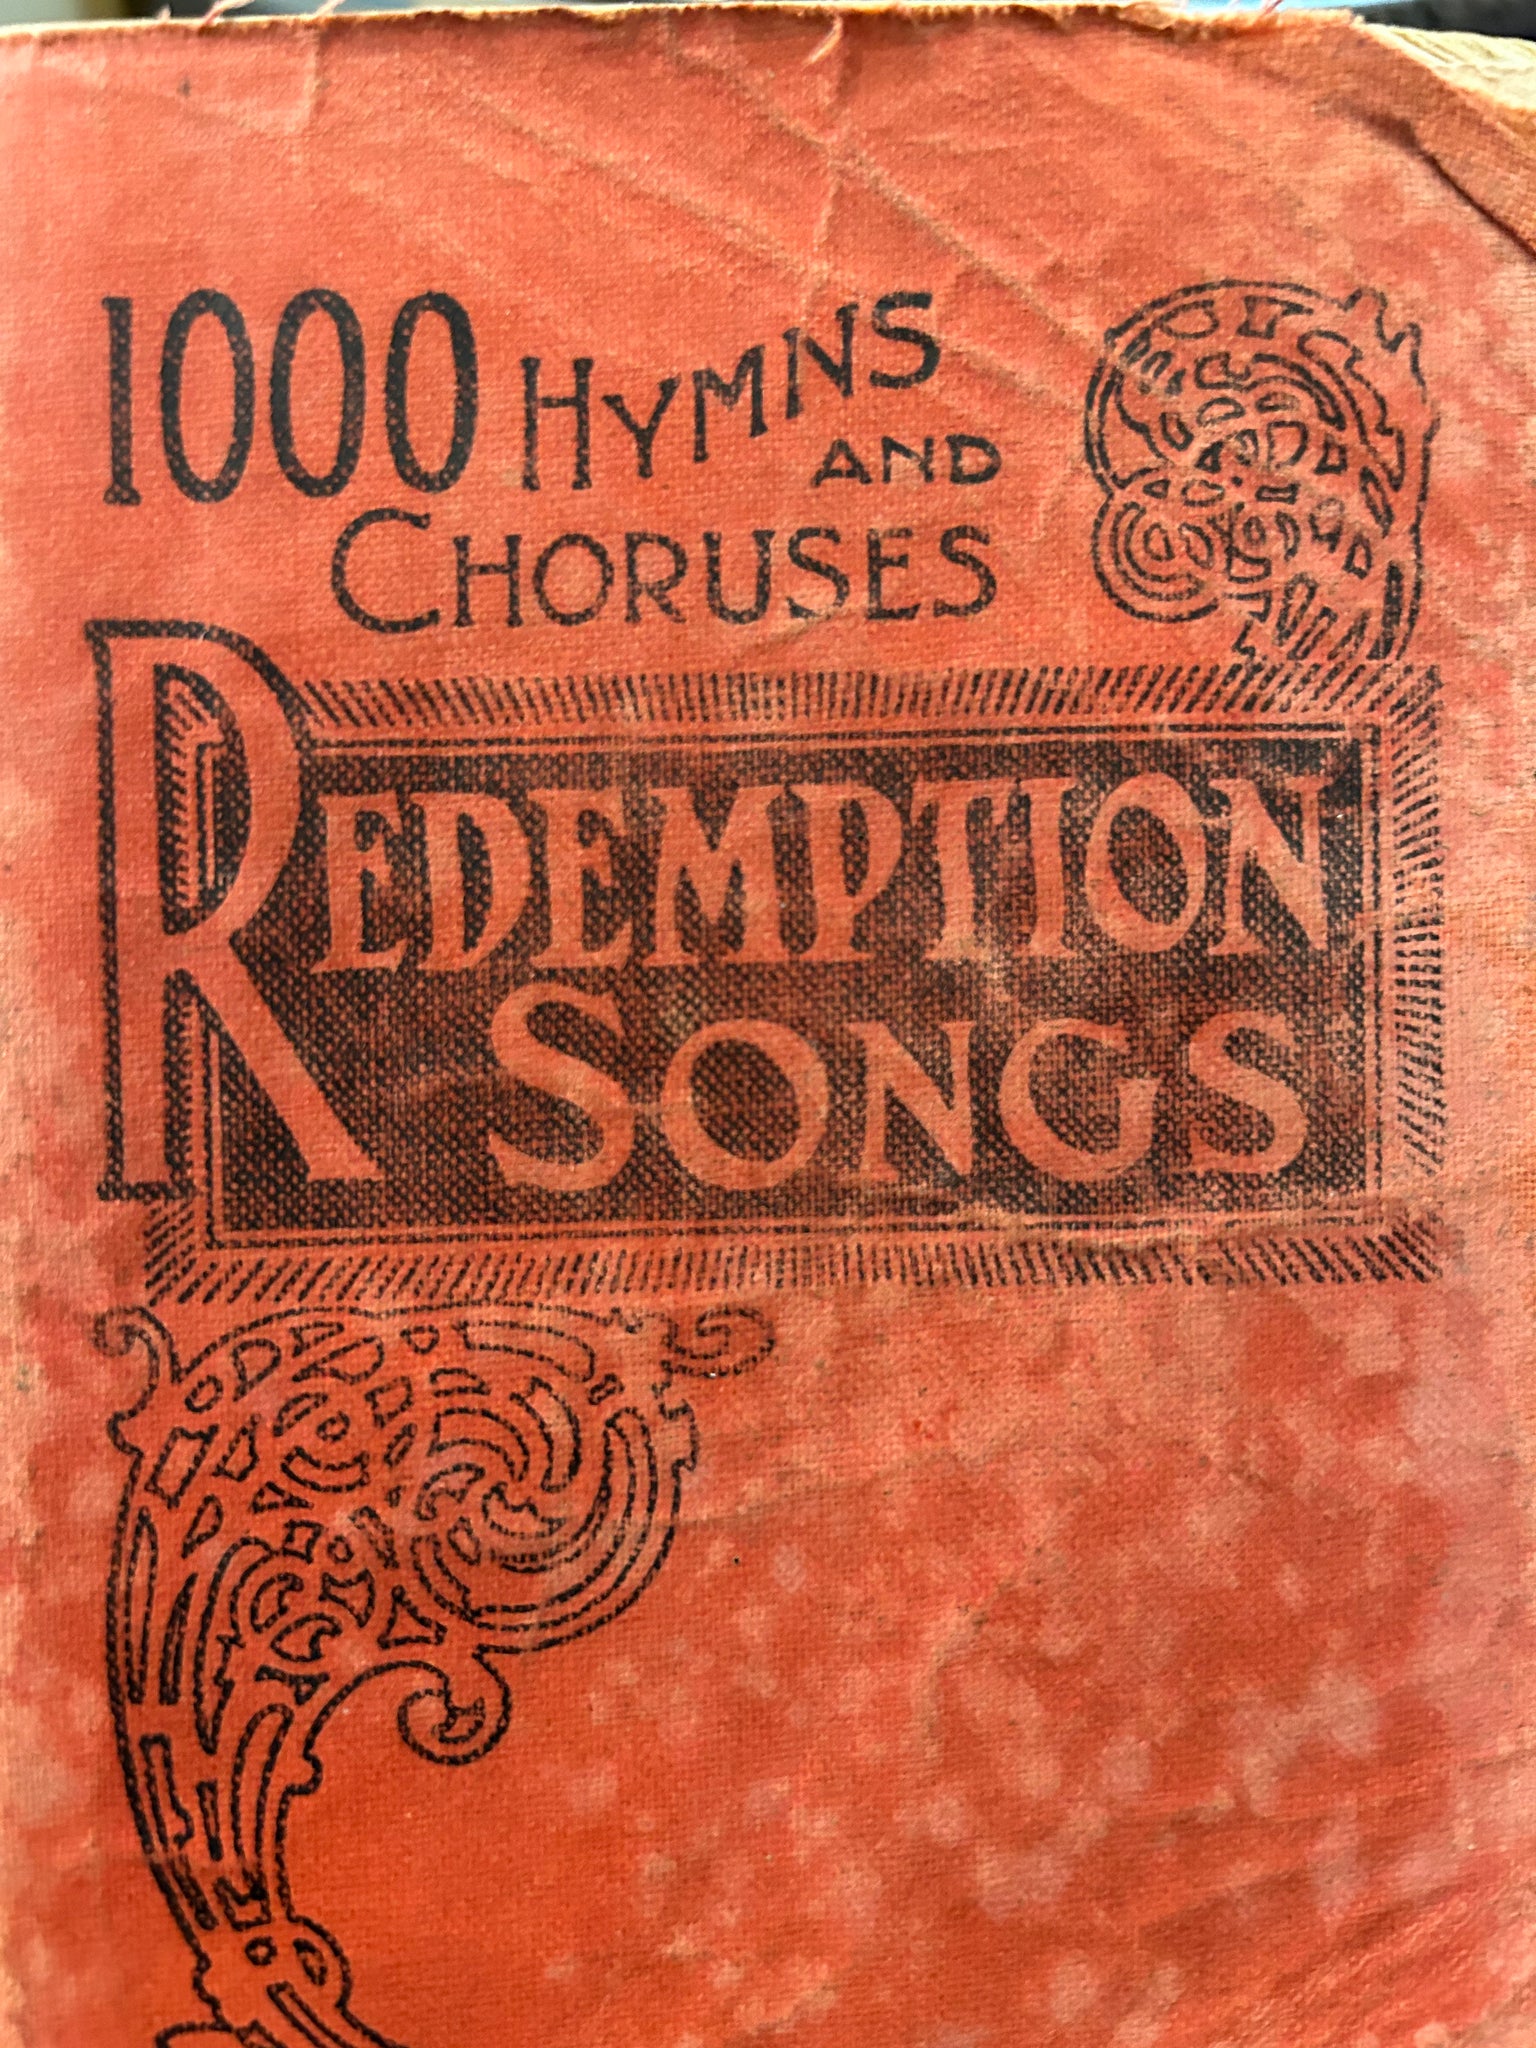 Redemption Songs: 1000 Hymns and Choruses